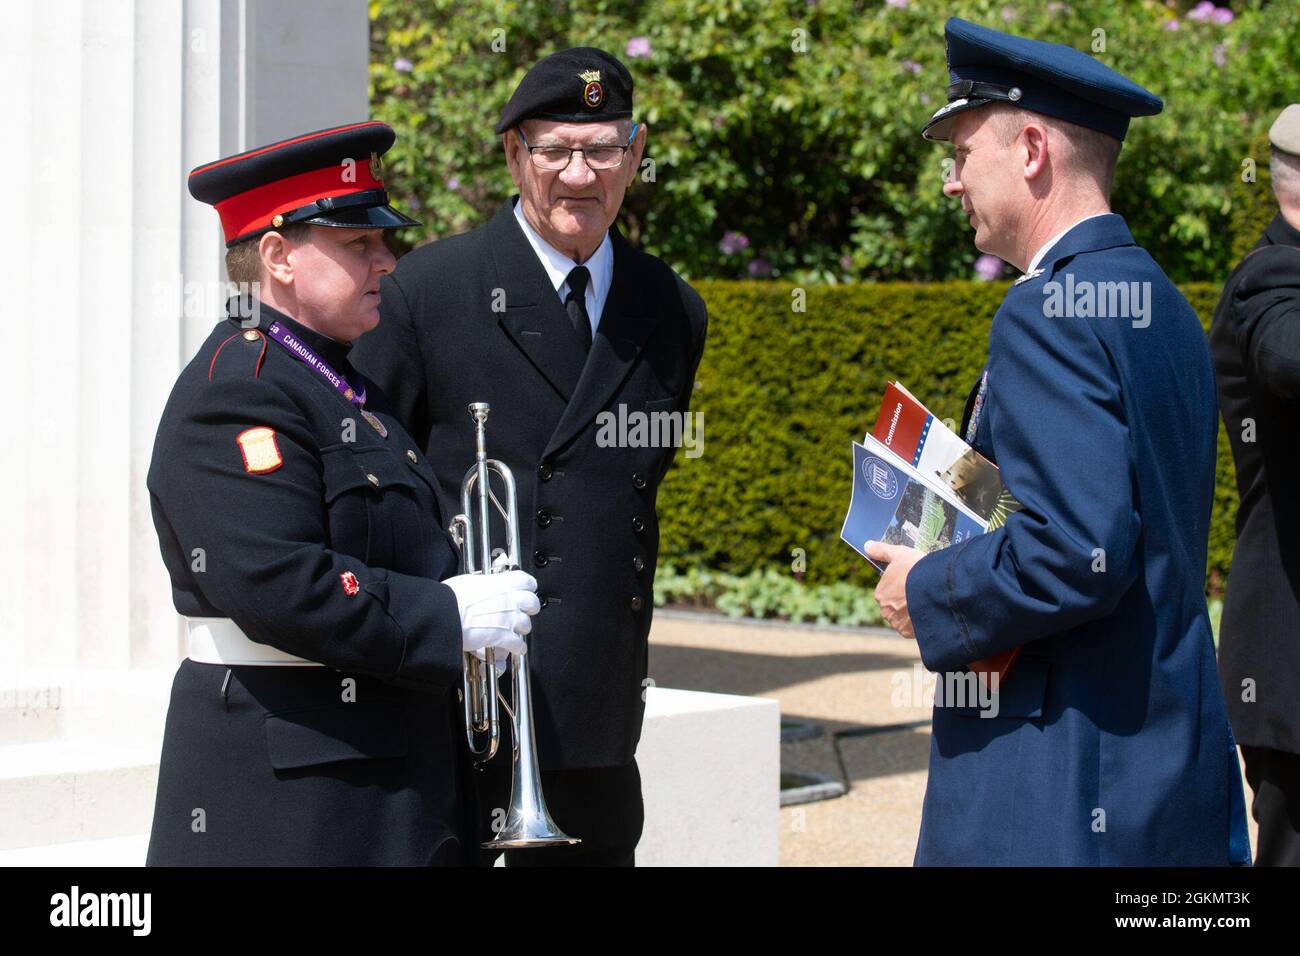 U.S. Air Force Col. Jon Hannah, right, 422nd Air Base Group commander, talks with Bugler Heidi Watkins, left, Canadian High Commission, UK, at a 2021 Memorial Day ceremony at the Brookwood American Military Cemetery, England, May 30, 2021. Memorial Day is one of our Nation's most solemn occasions. It serves as a chance to pause, reflect, and honor the women and men who gave the last full measure defending our Nation and our democratic ideals. Stock Photo